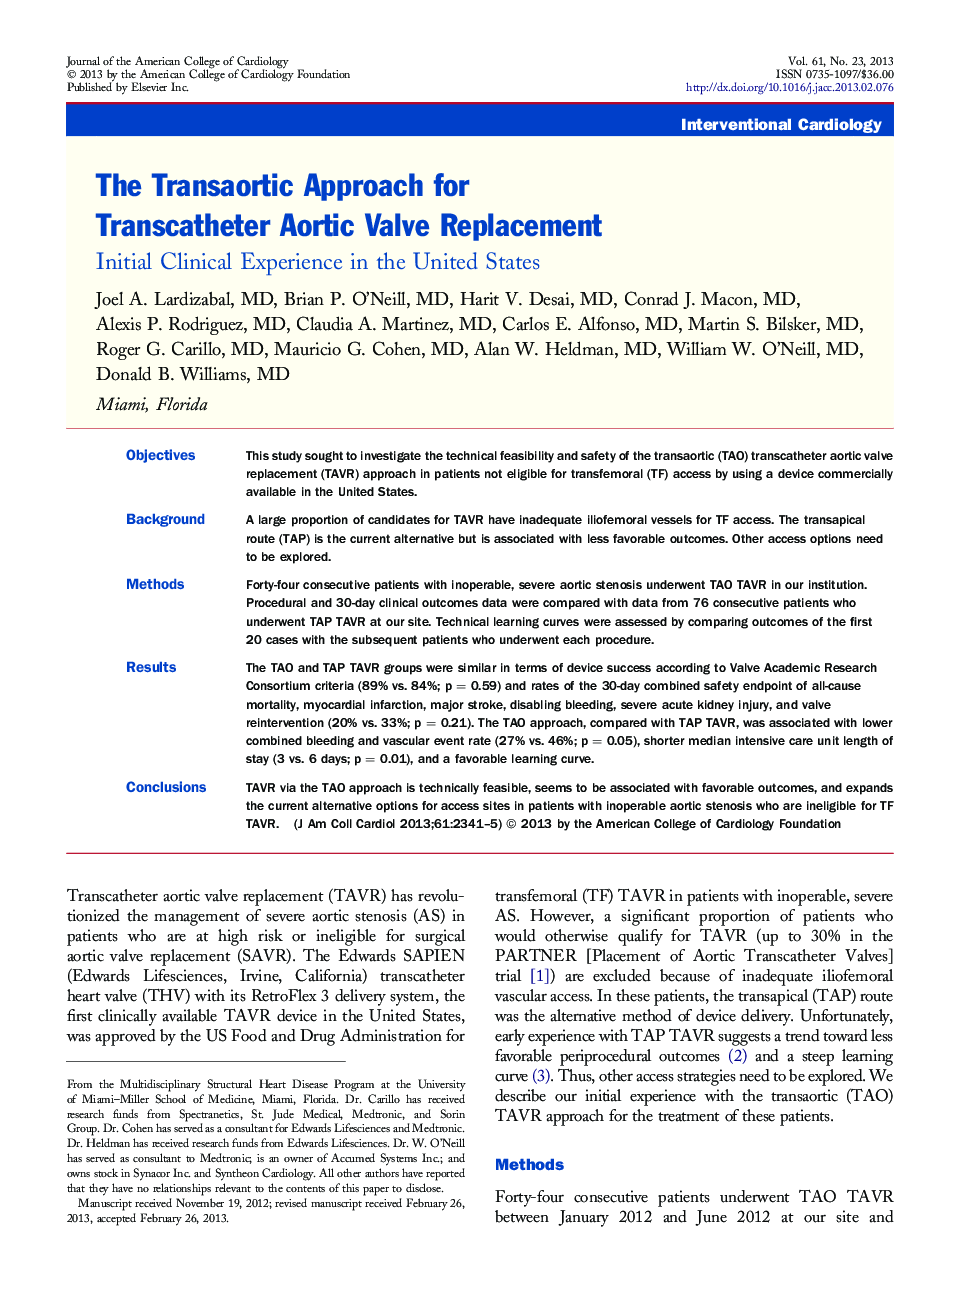 The Transaortic Approach for Transcatheter Aortic Valve Replacement : Initial Clinical Experience in the United States